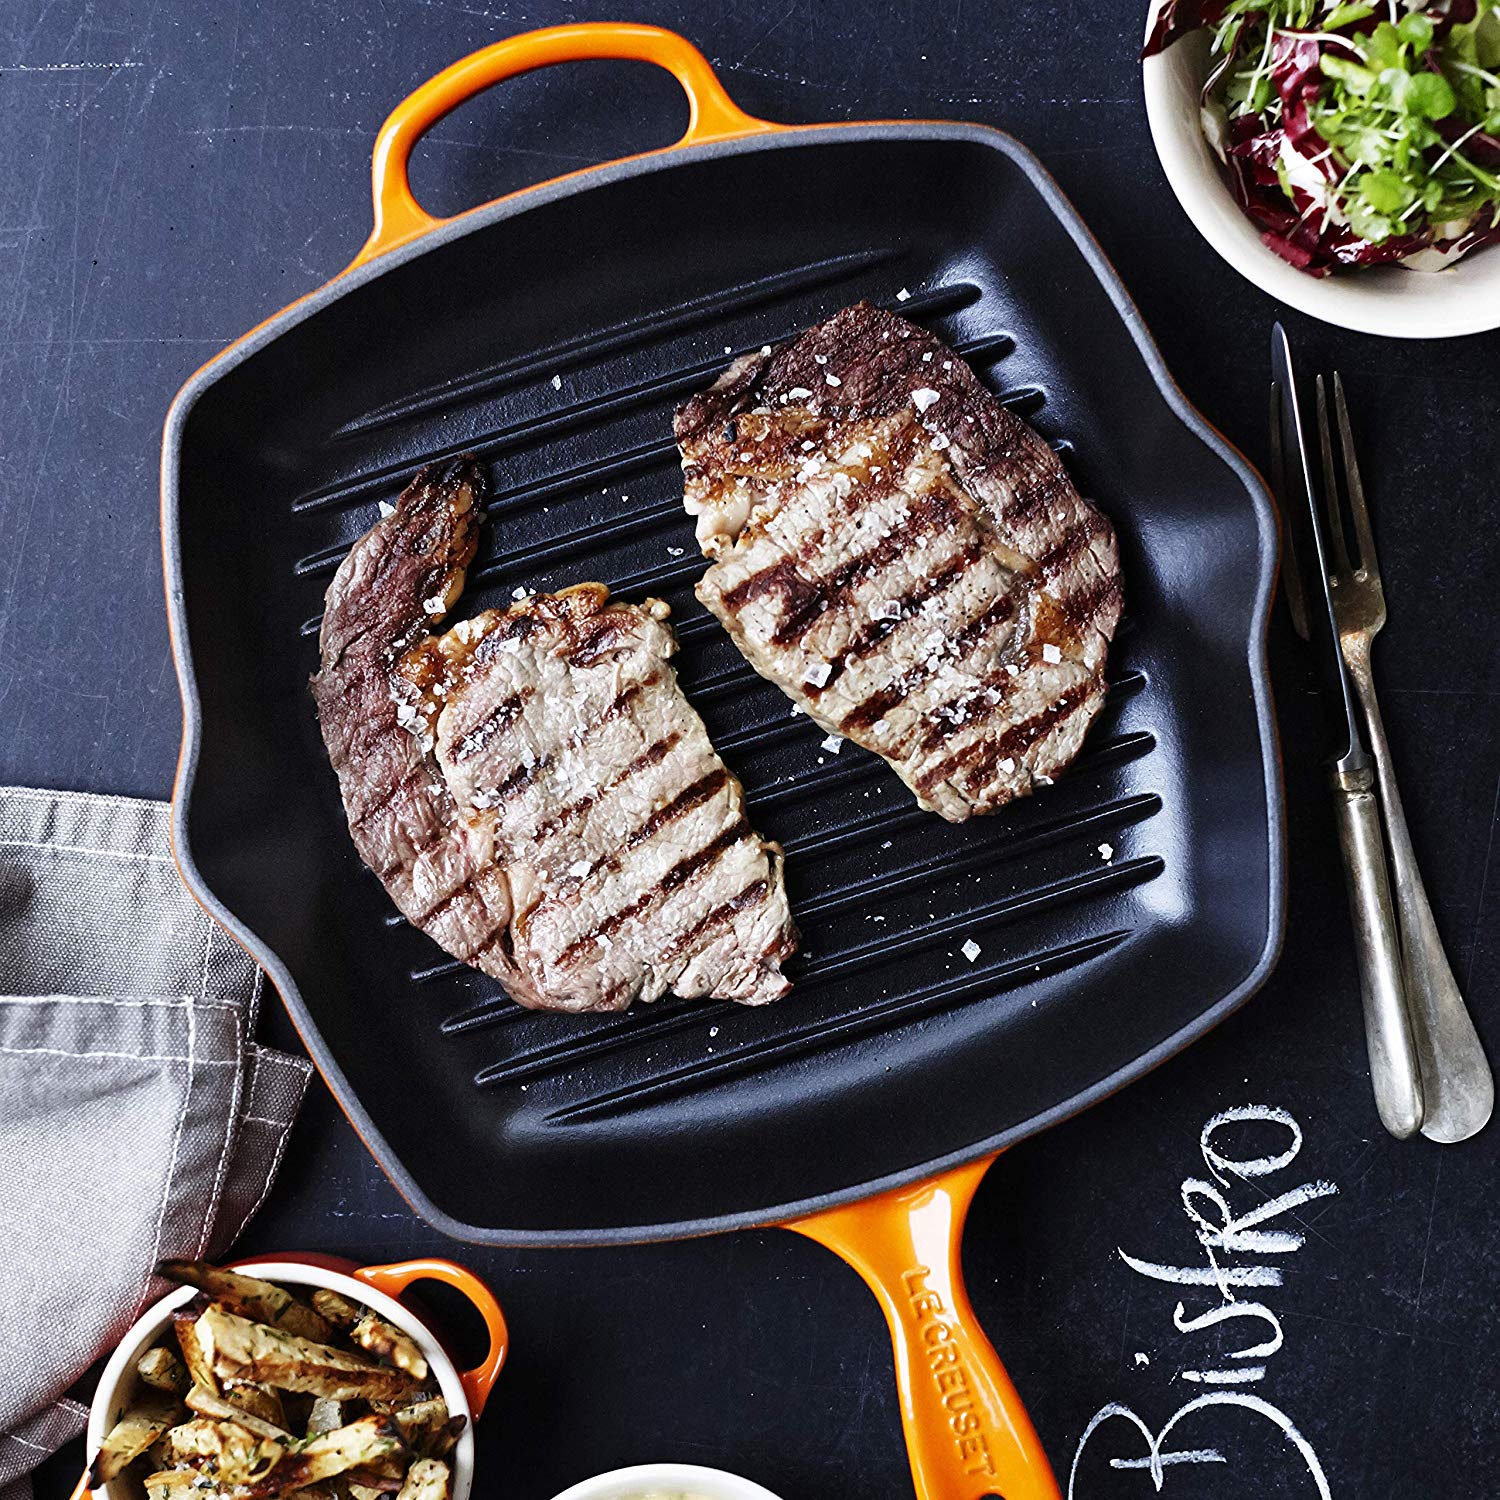 https://www.consiglioskitchenware.com/cdn/shop/products/Le_Creuset_Flame_Square_Skillet_Grilling_Canada_753136b7-4d06-406f-97f7-64d4fcf60c3e_1500x1500.jpg?v=1605128216